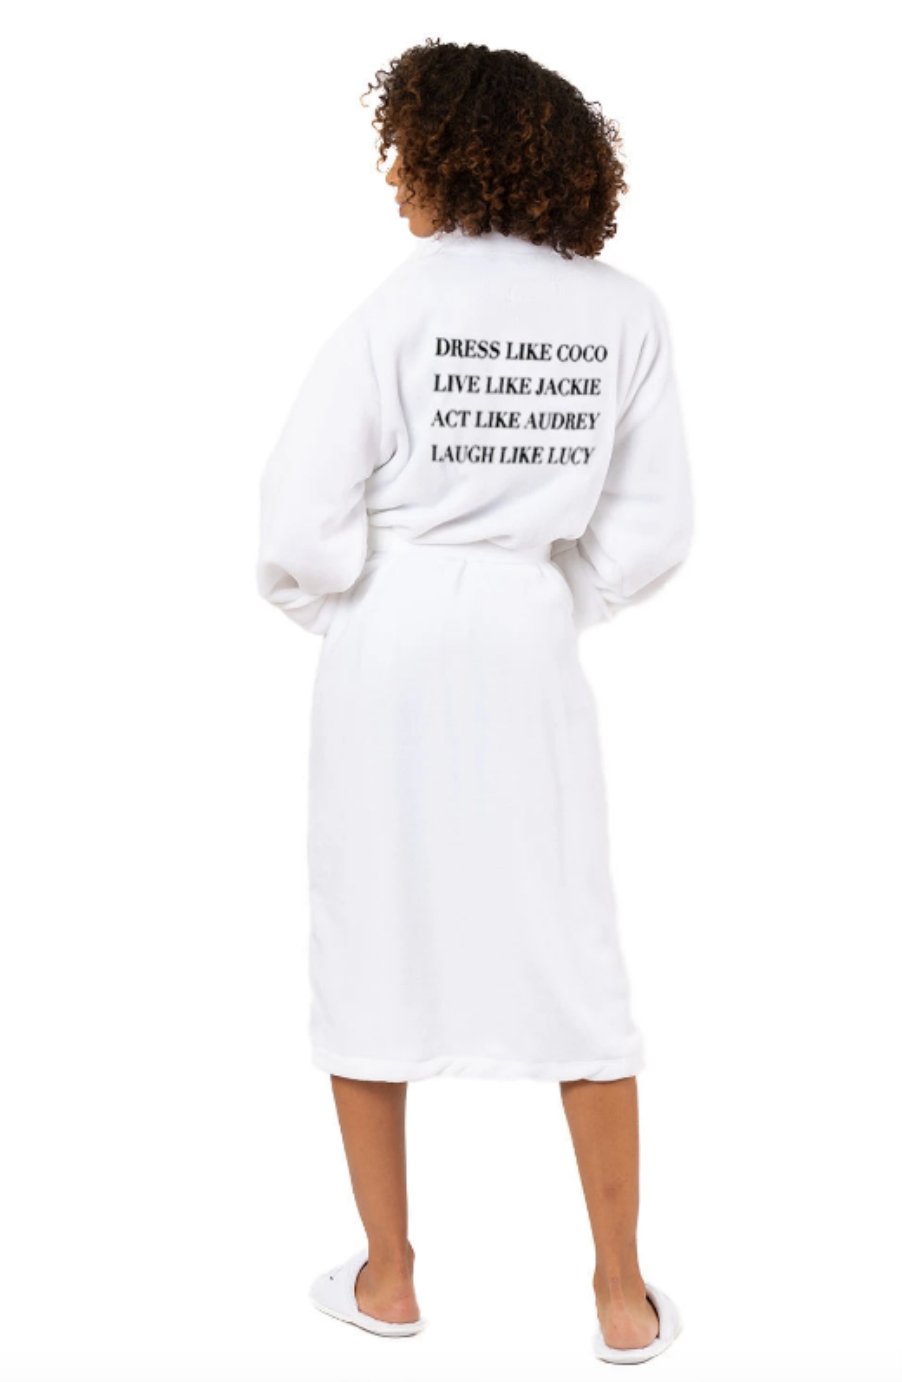 LA Trading Co Luxe Plush Robe - Dress Like Coco - White available at The Good Life Boutique